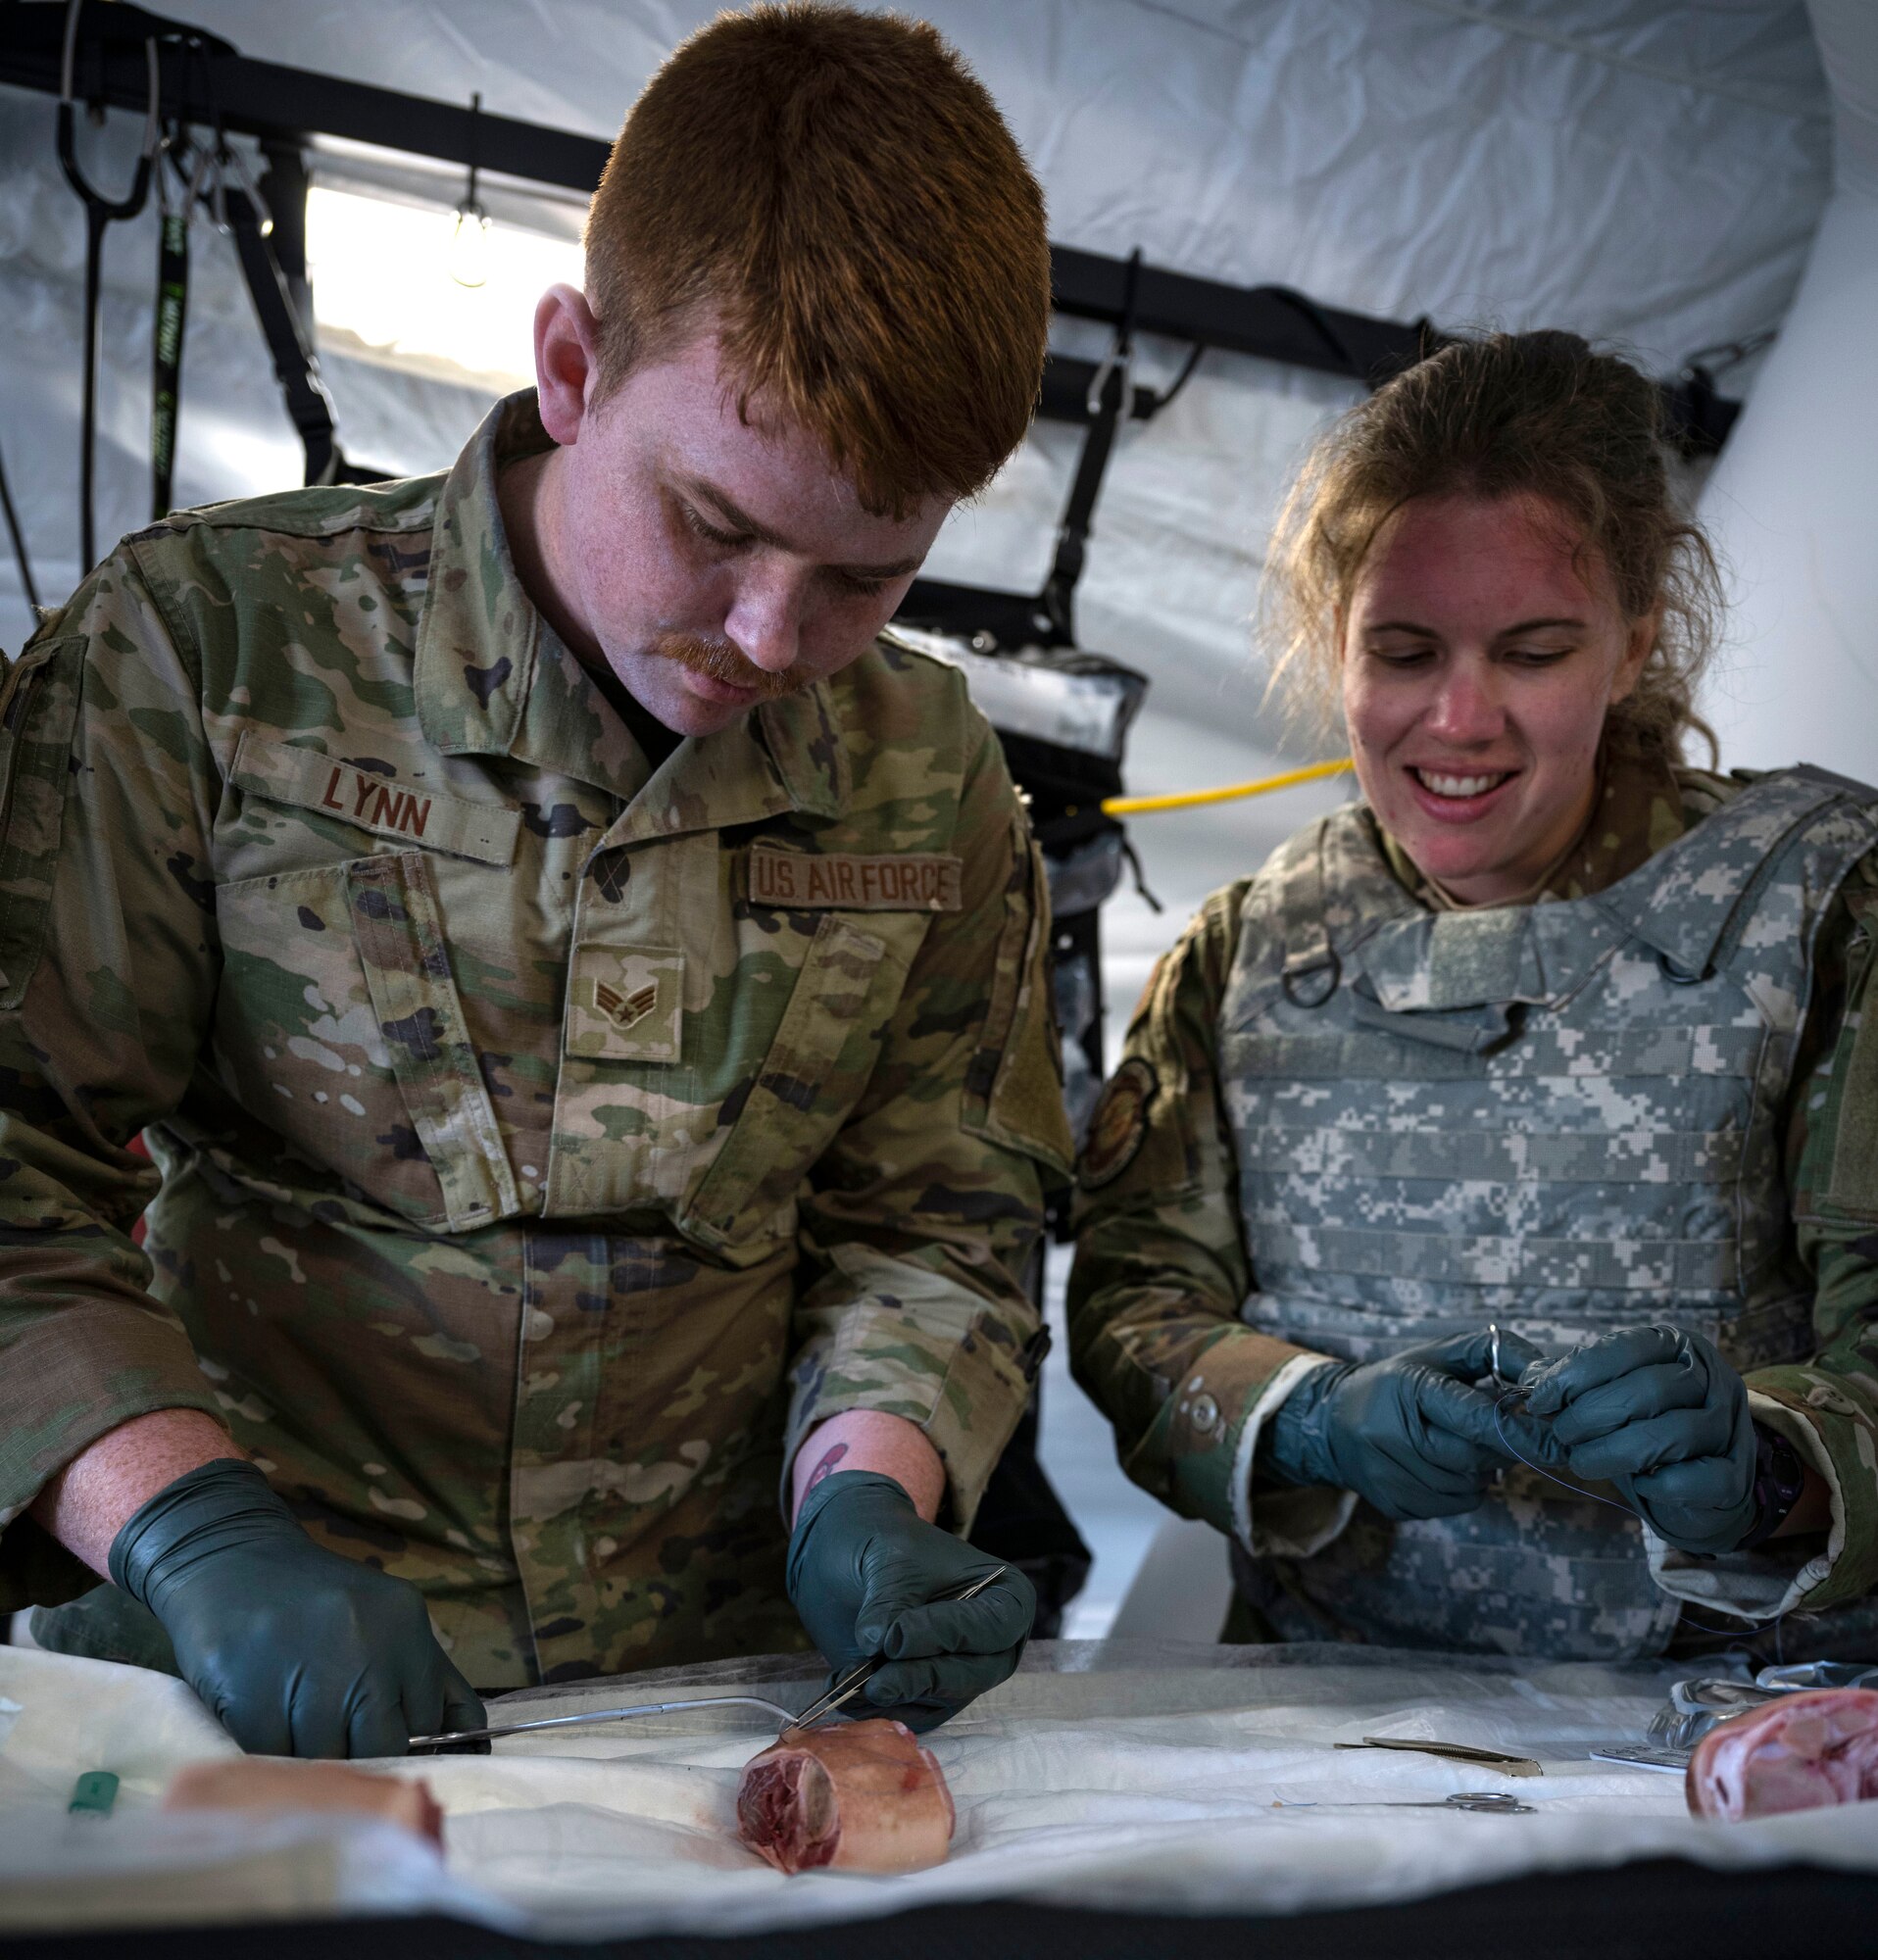 Capt. Karen Rodriguez, right, 4th Operational Medical Readiness Squadron flight doctor, teaches Senior Airman David Lynn, 4th Fighter Wing public affairs specialist, how to administer sutures during Agile Cub 4 at Marine Corps Air Station Cherry Point, North Carolina, March 7, 2023. This agile combat employment exercise shifts the generation of airpower from large, centralized bases to networks of smaller, dispersed locations.